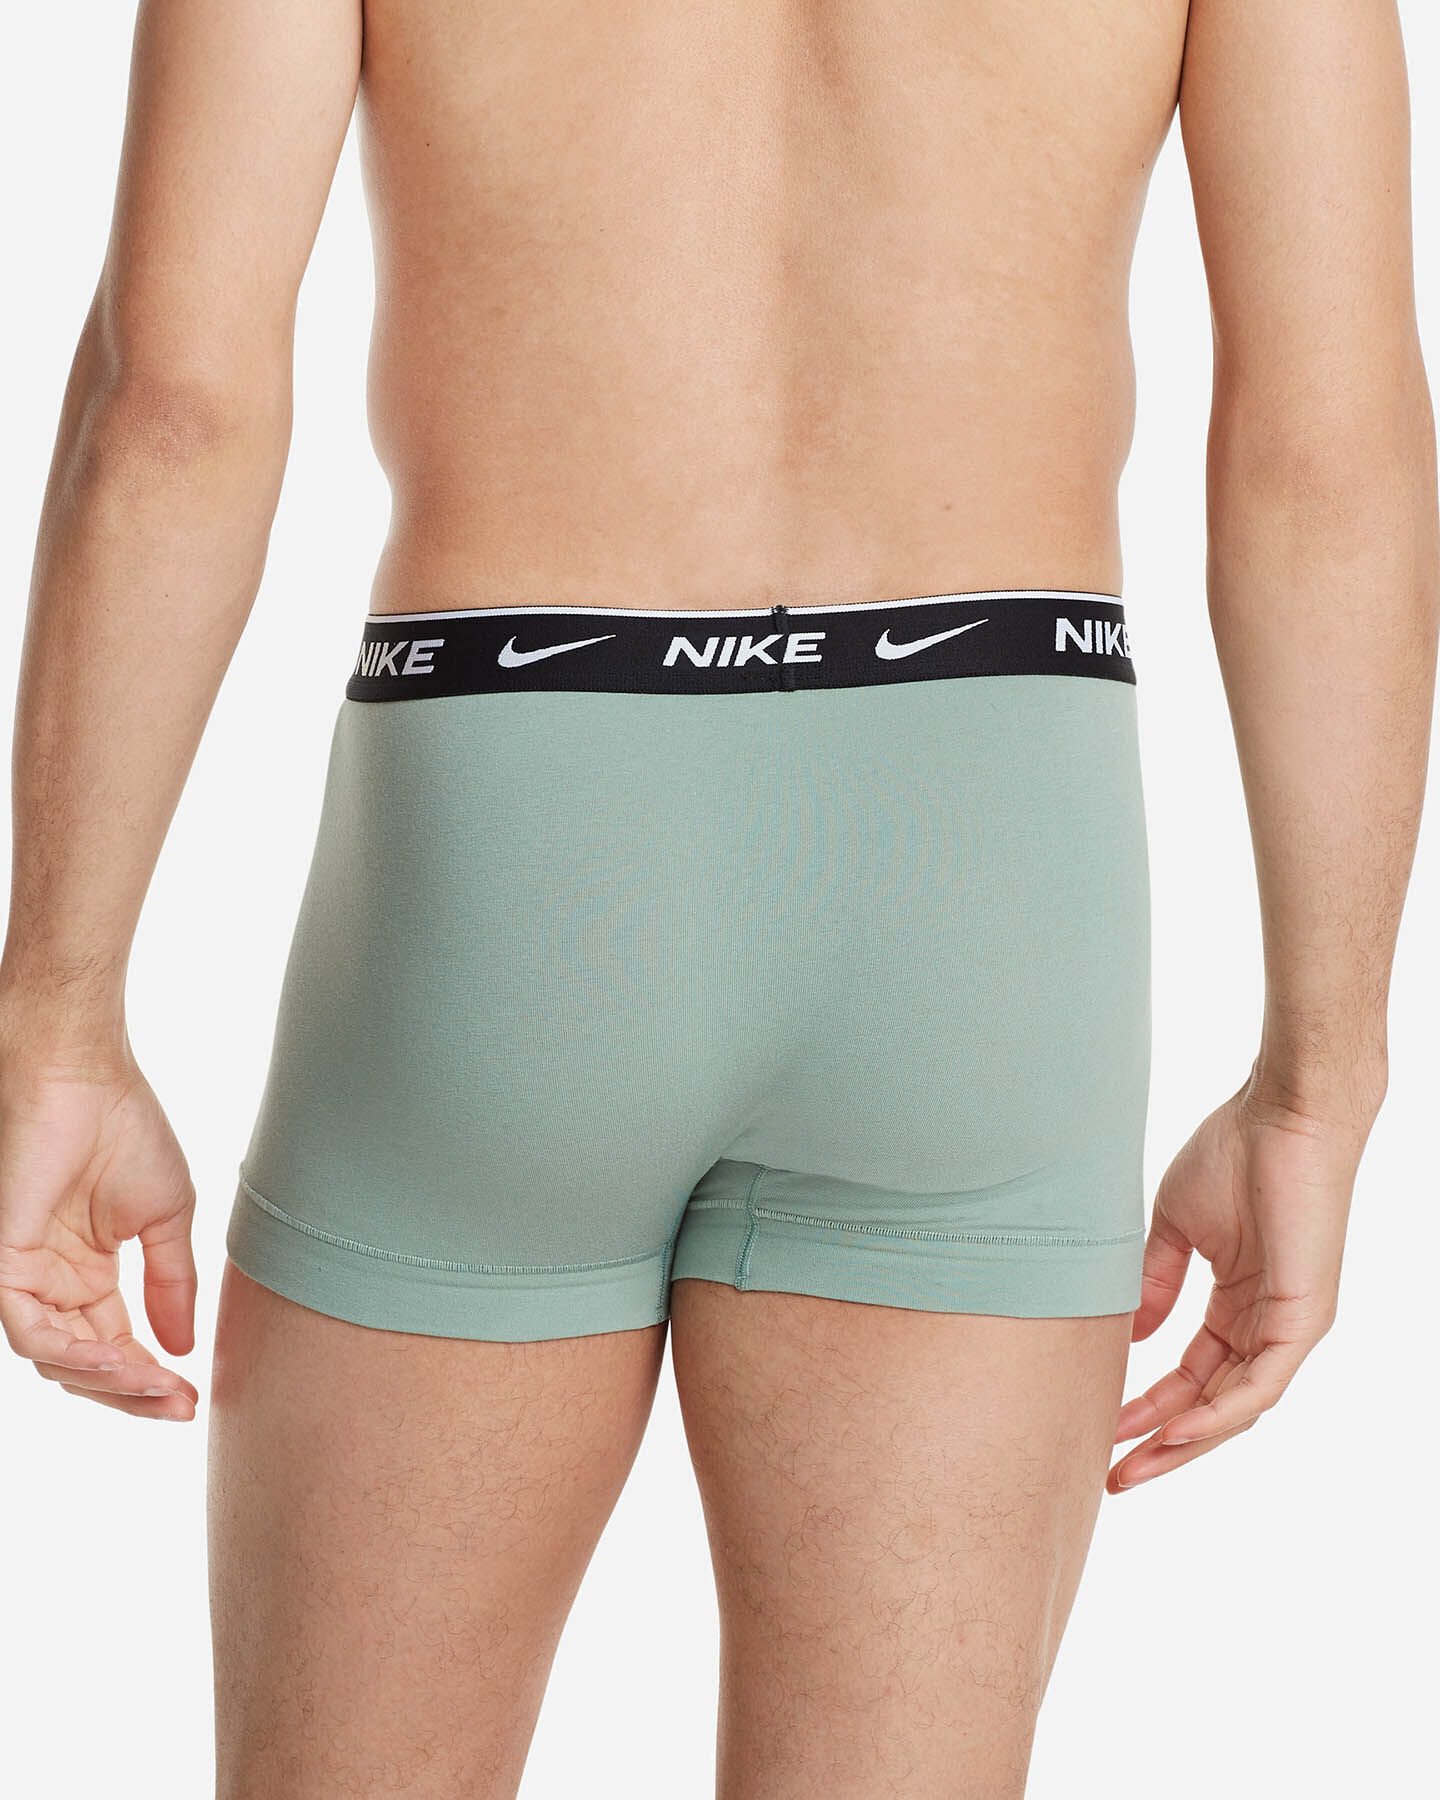  Intimo NIKE 3PACK BOXER EVERYDAY M S4099881|KUS|S scatto 3